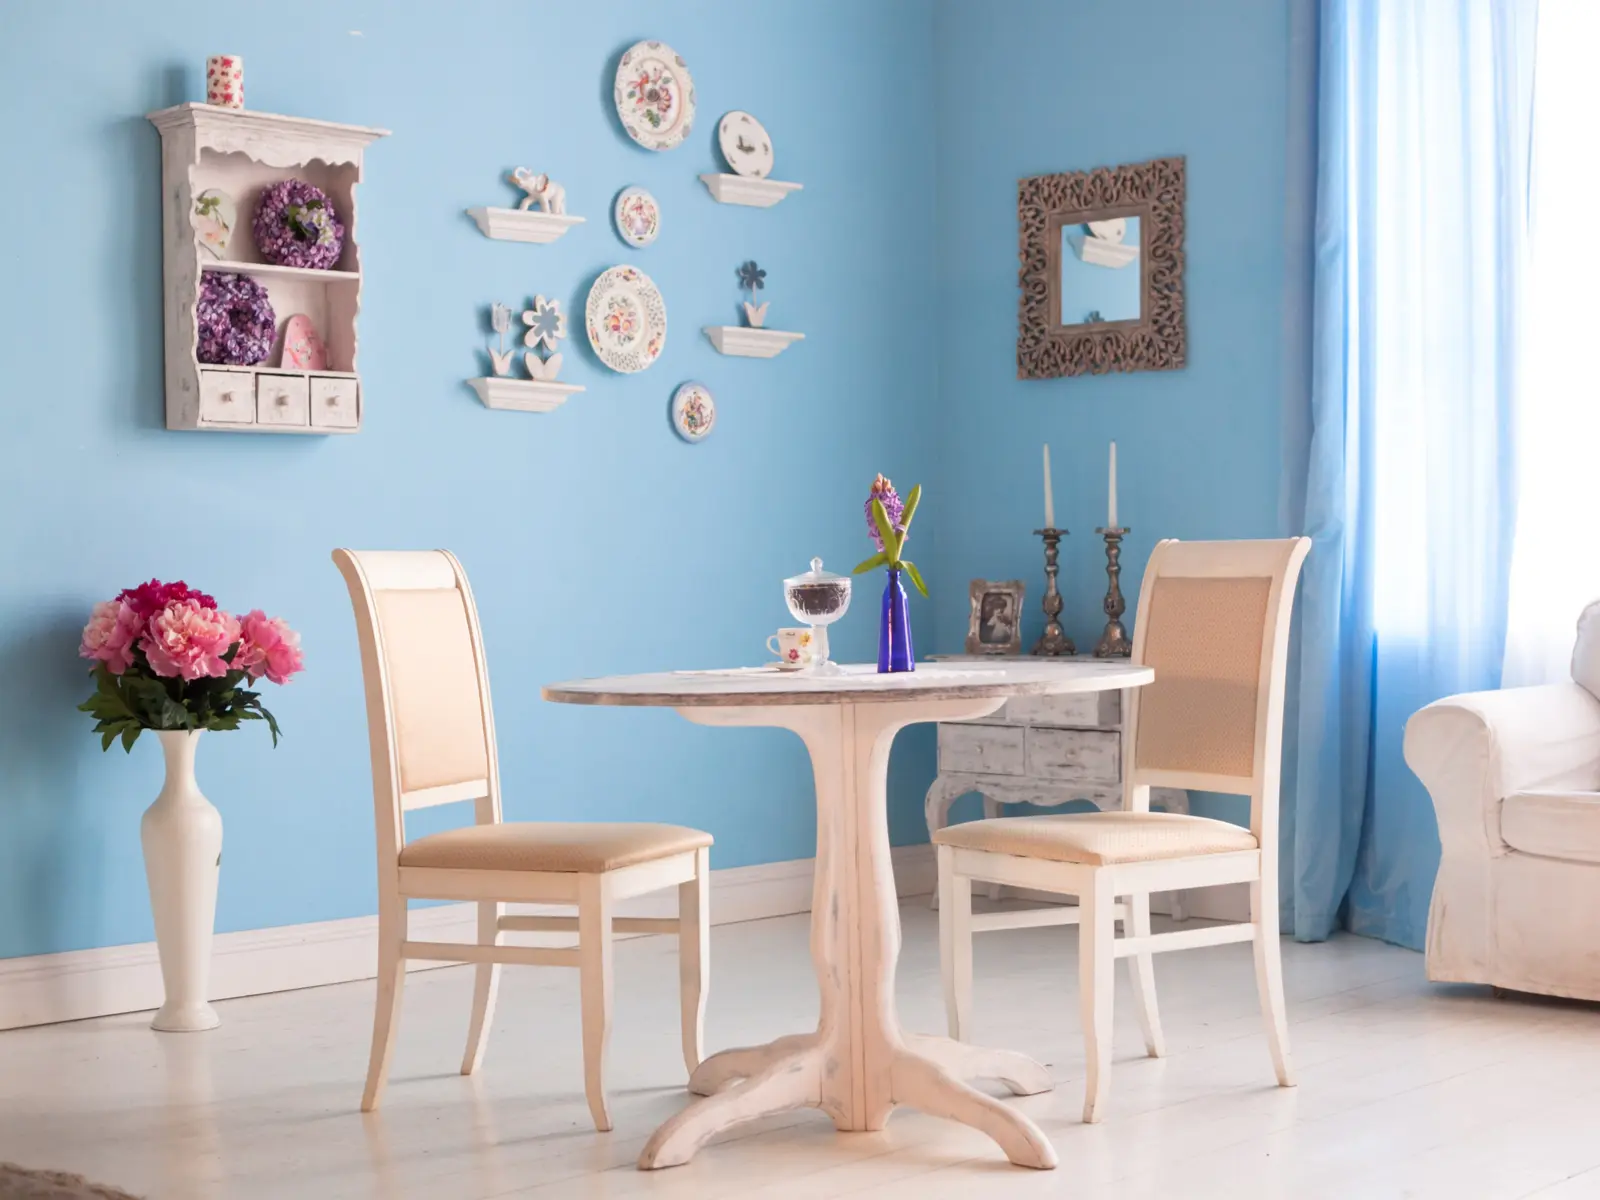 Dining room with blue paint and old-style decorations for a piece on what colors go with light blue